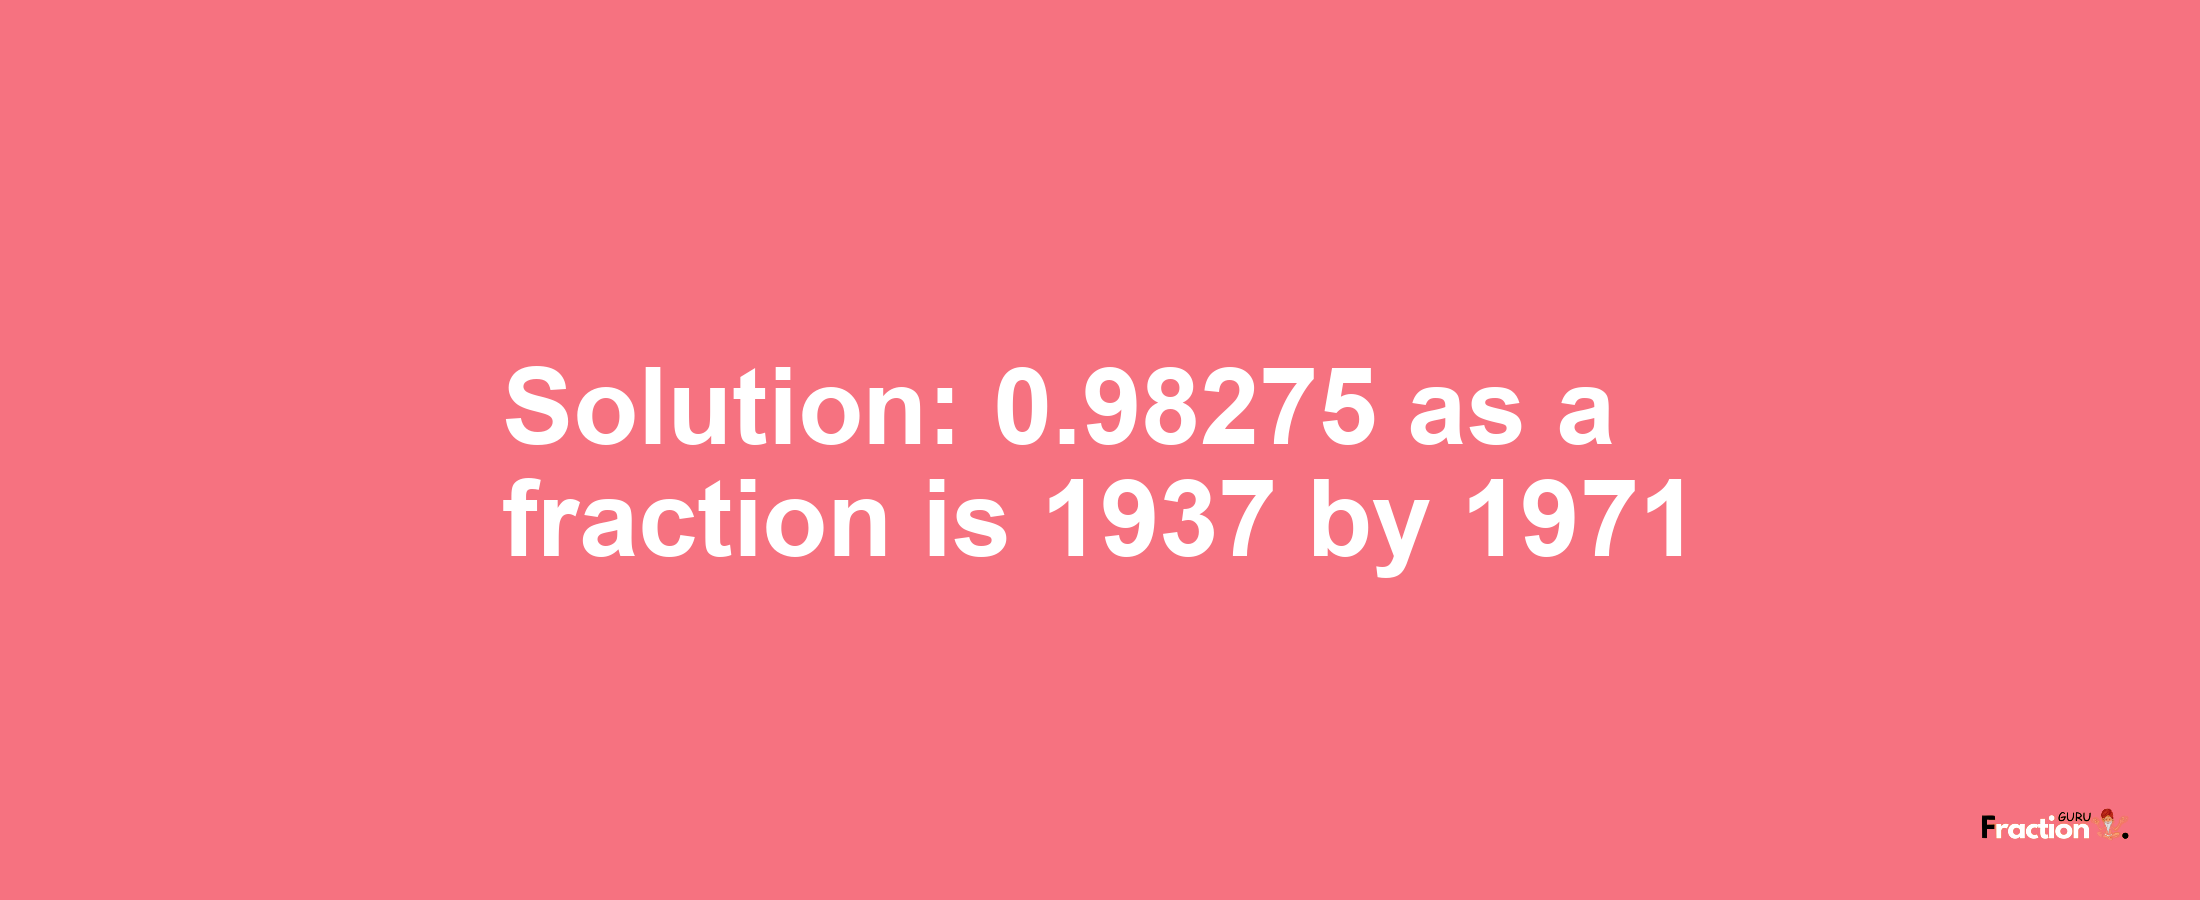 Solution:0.98275 as a fraction is 1937/1971